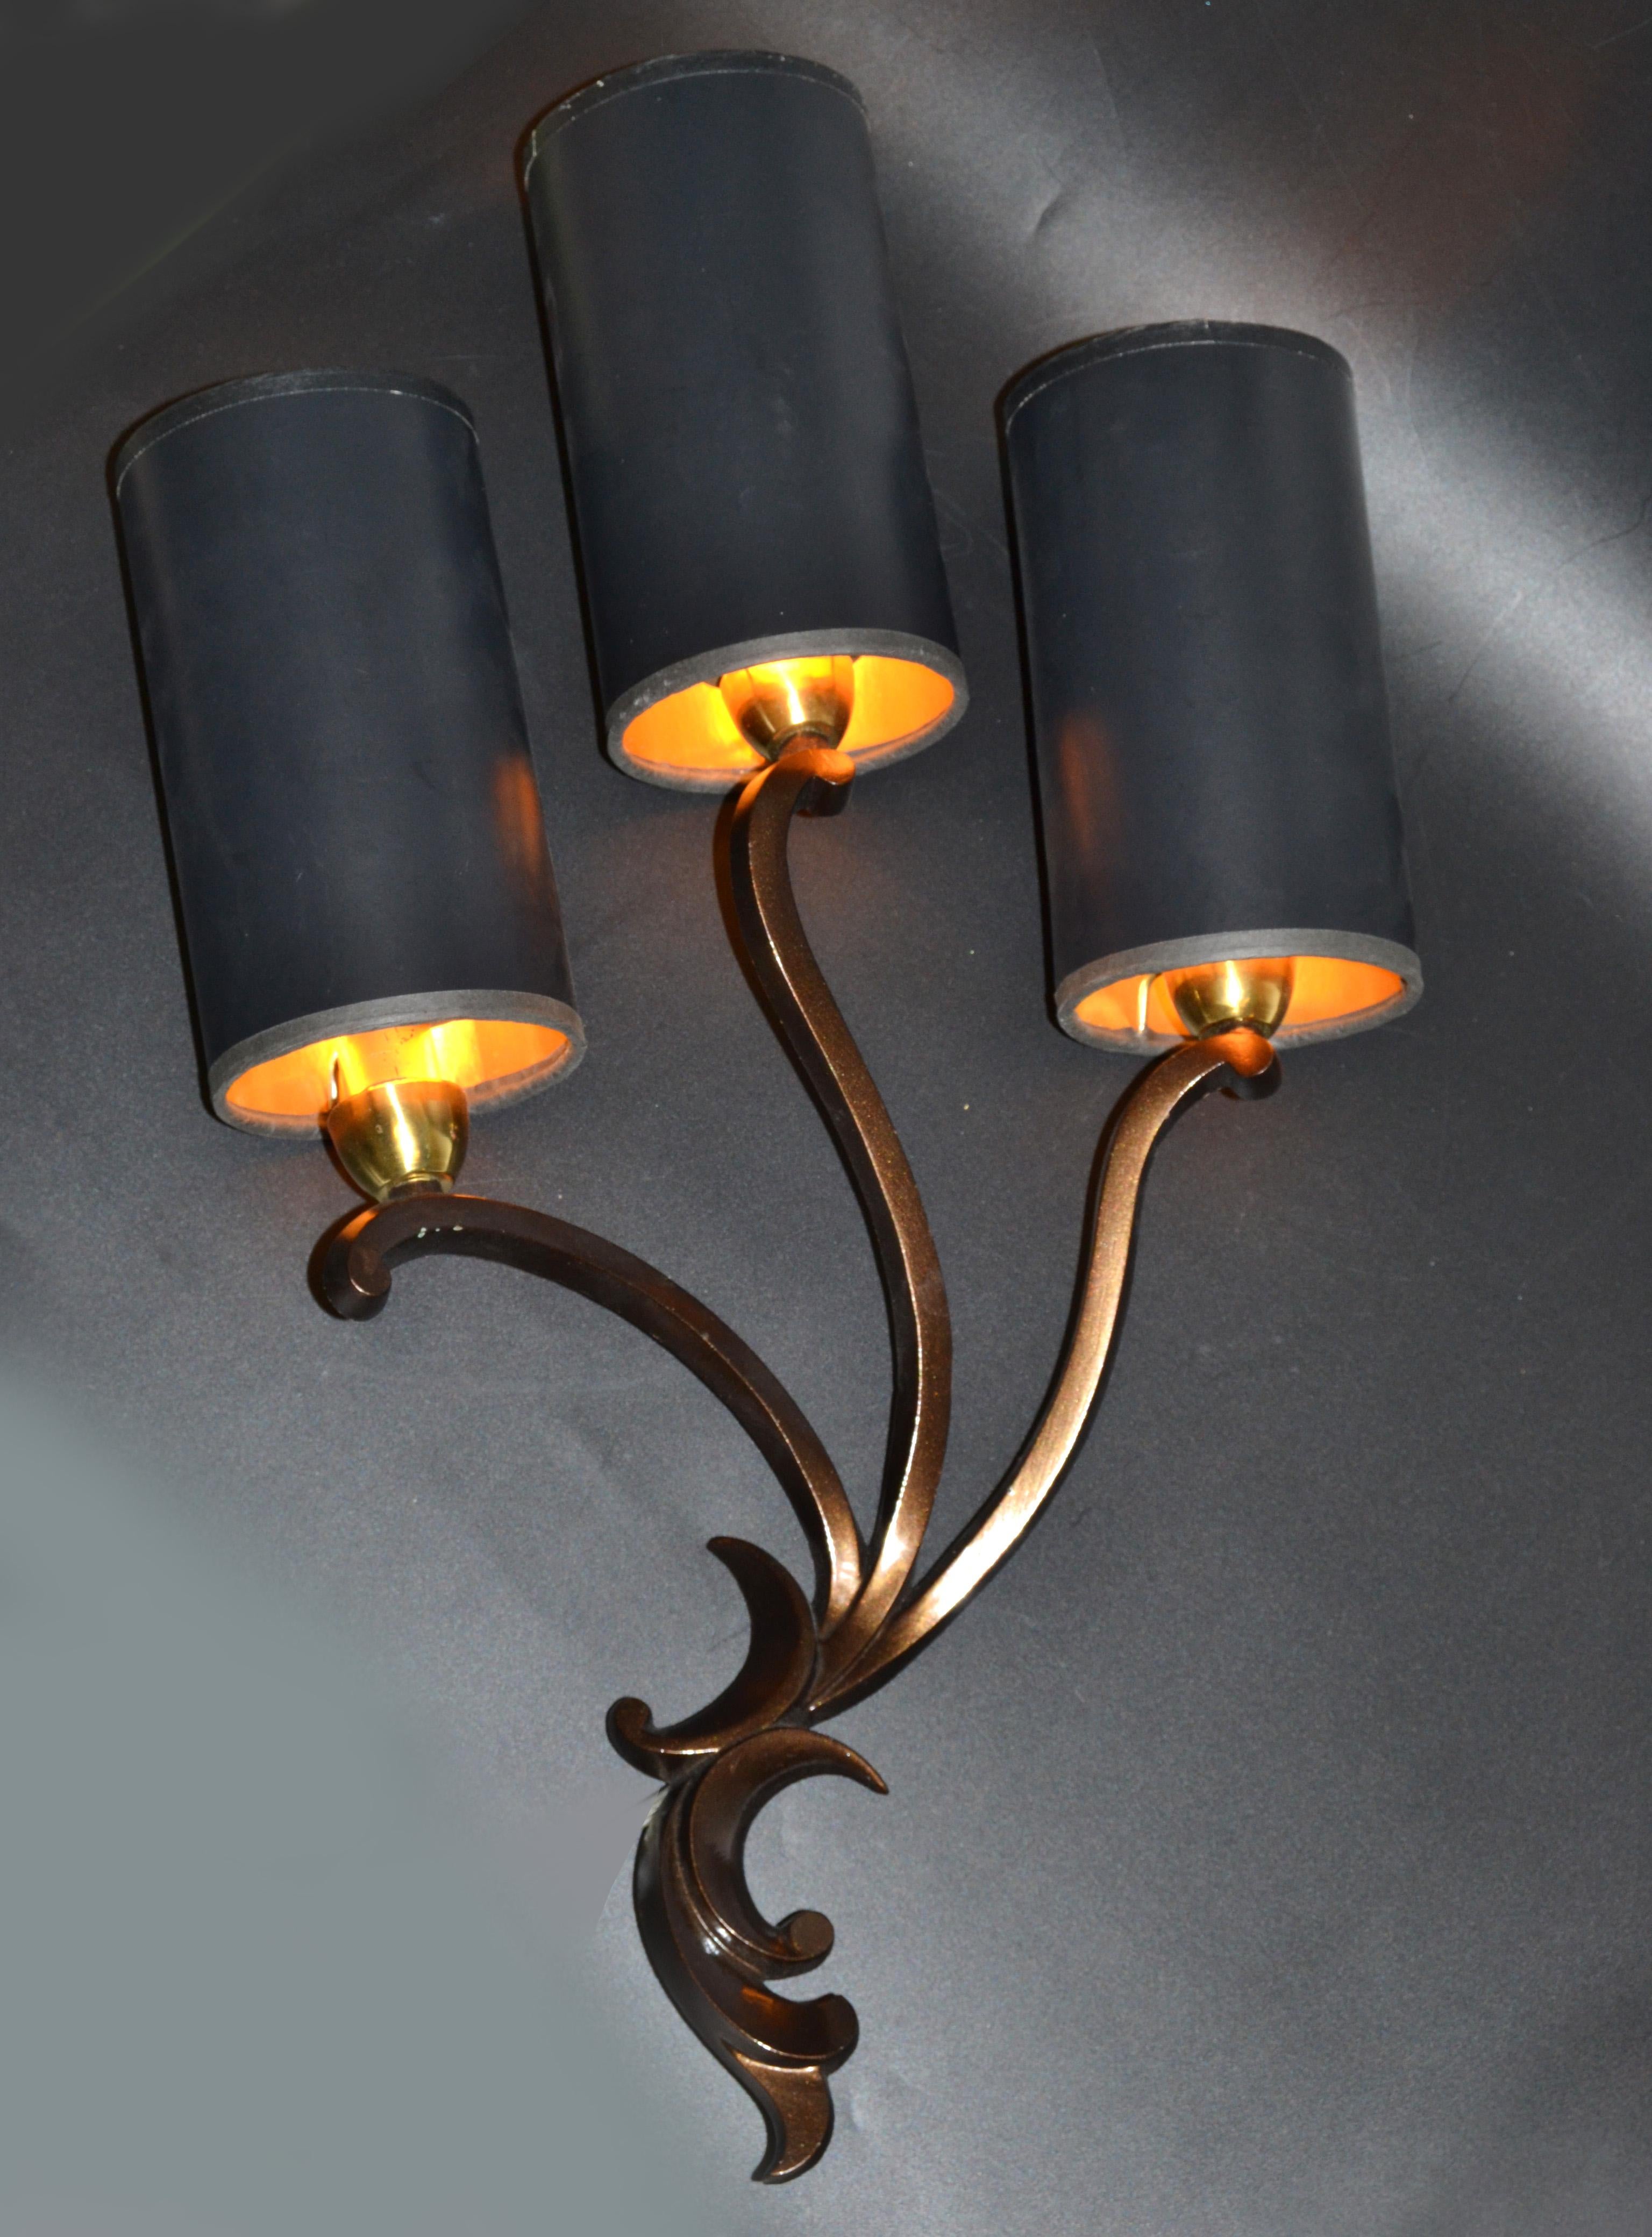 Cast Riccardo Scarpa Bronze Sconces & Shades, Wall Lights Art Deco Italy 1950, Pair For Sale